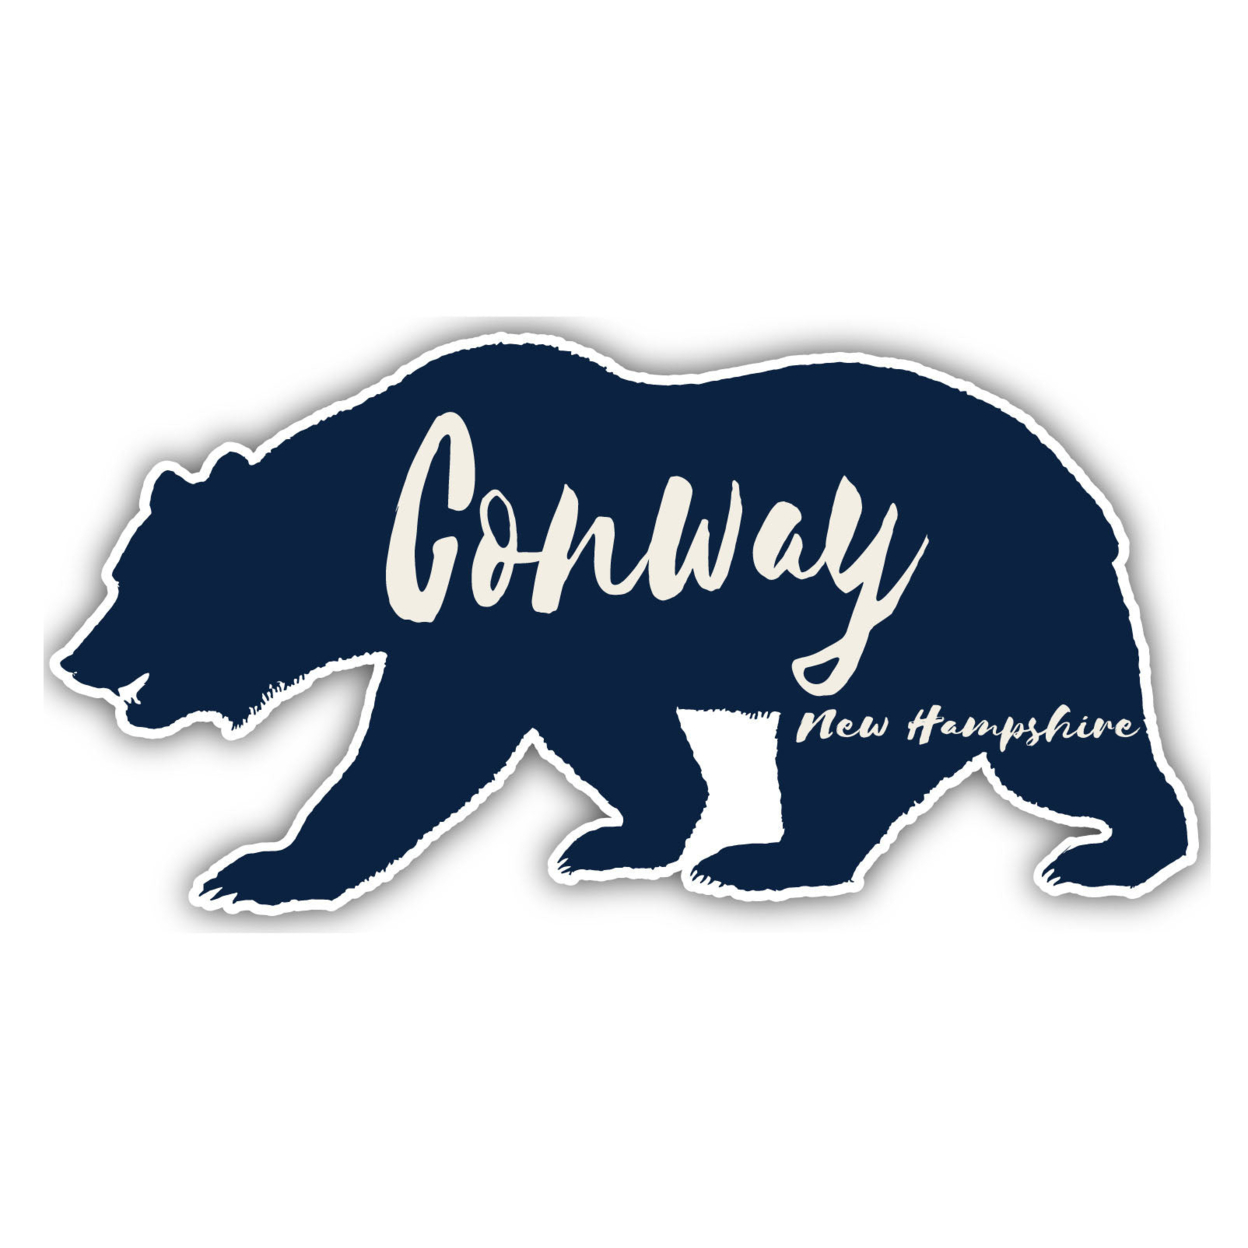 Conway New Hampshire Souvenir Decorative Stickers (Choose Theme And Size) - Single Unit, 6-Inch, Great Outdoors